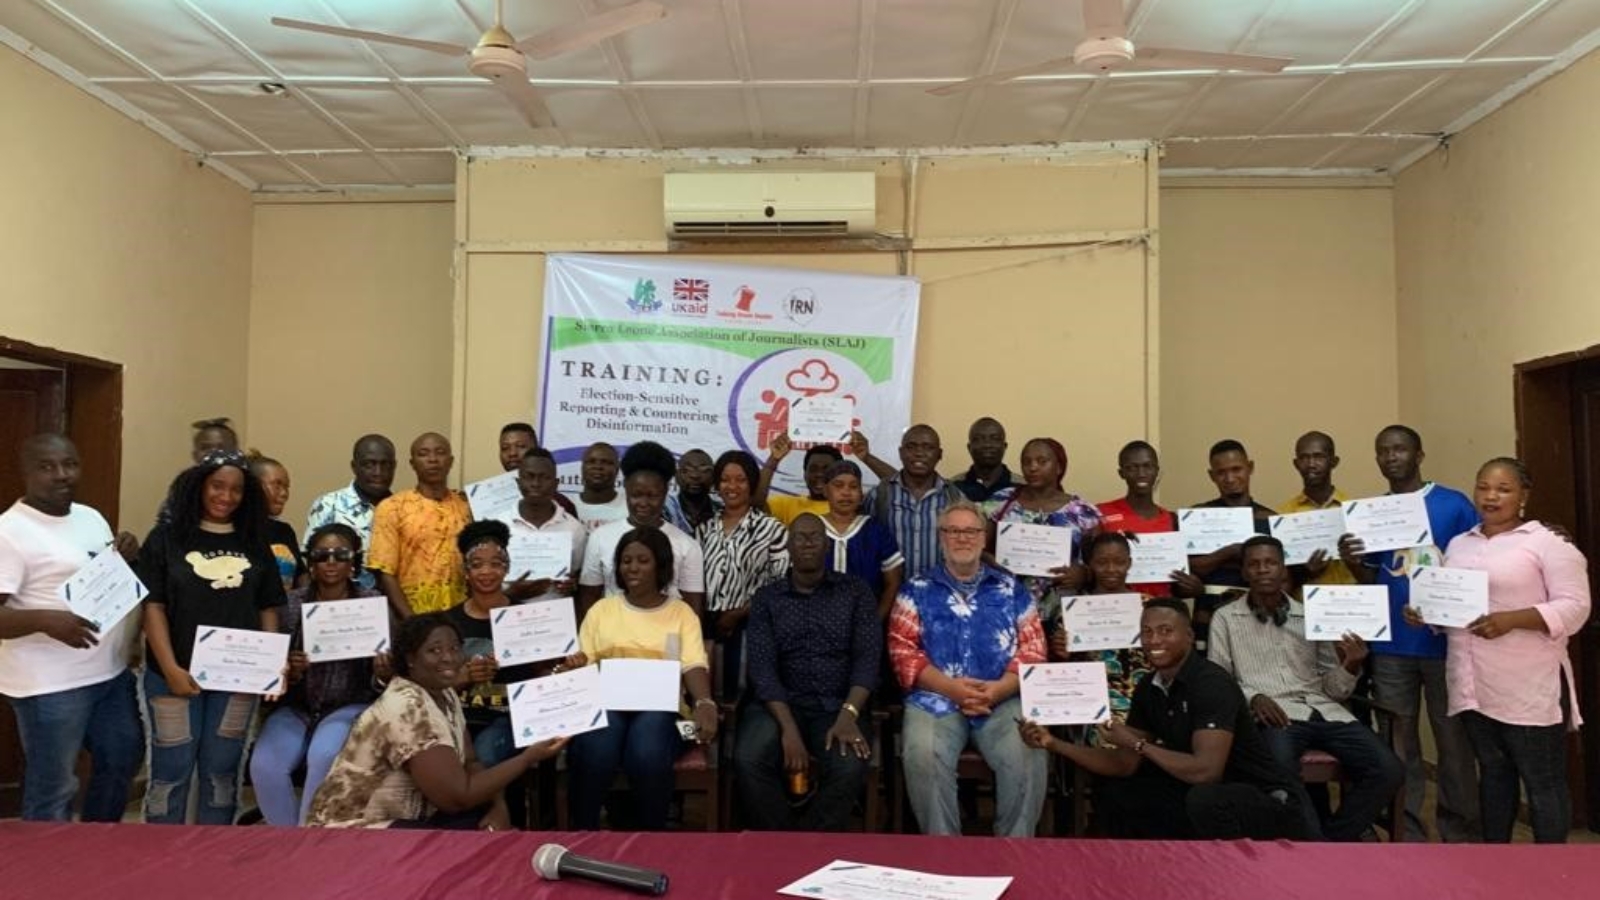 Cross section of participants from Bombail, Port Loko, Kono, Falaba and Tonkolili districts with their certificates of participation